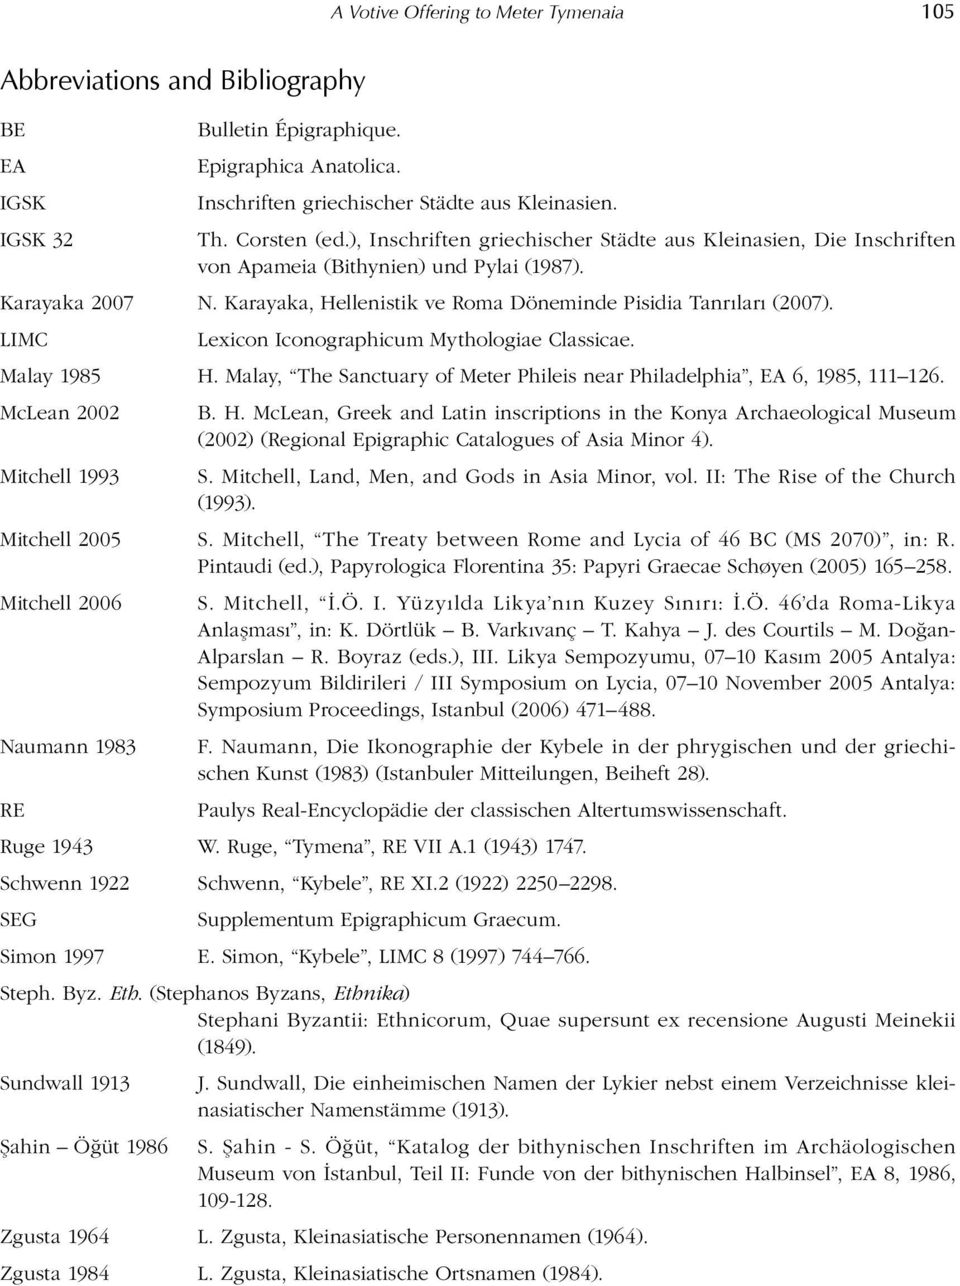 LIMC Lexicon Iconographicum Mythologiae Classicae. Malay 1985 H. Malay, The Sanctuary of Meter Phileis near Philadelphia, EA 6, 1985, 111 126. McLean 2002 Mitchell 1993 B. H. McLean, Greek and Latin inscriptions in the Konya Archaeological Museum (2002) (Regional Epigraphic Catalogues of Asia Minor 4).